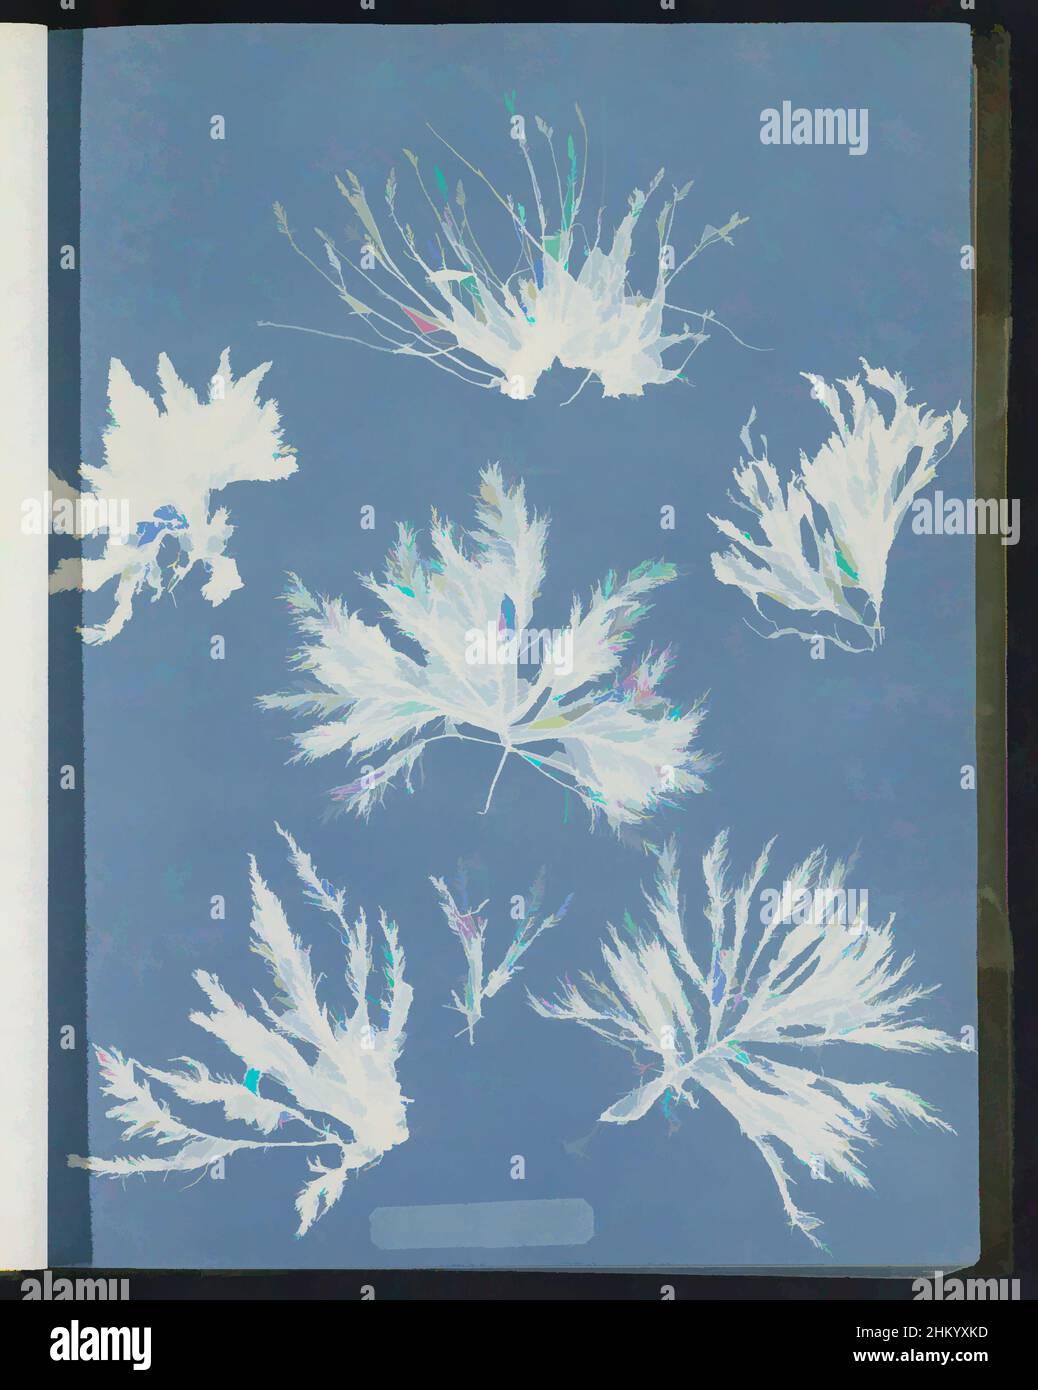 Art inspired by Bryopsis plumosa, Anna Atkins, United Kingdom, c. 1843 - c. 1853, photographic support, cyanotype, height 250 mm × width 200 mm, Classic works modernized by Artotop with a splash of modernity. Shapes, color and value, eye-catching visual impact on art. Emotions through freedom of artworks in a contemporary way. A timeless message pursuing a wildly creative new direction. Artists turning to the digital medium and creating the Artotop NFT Stock Photo